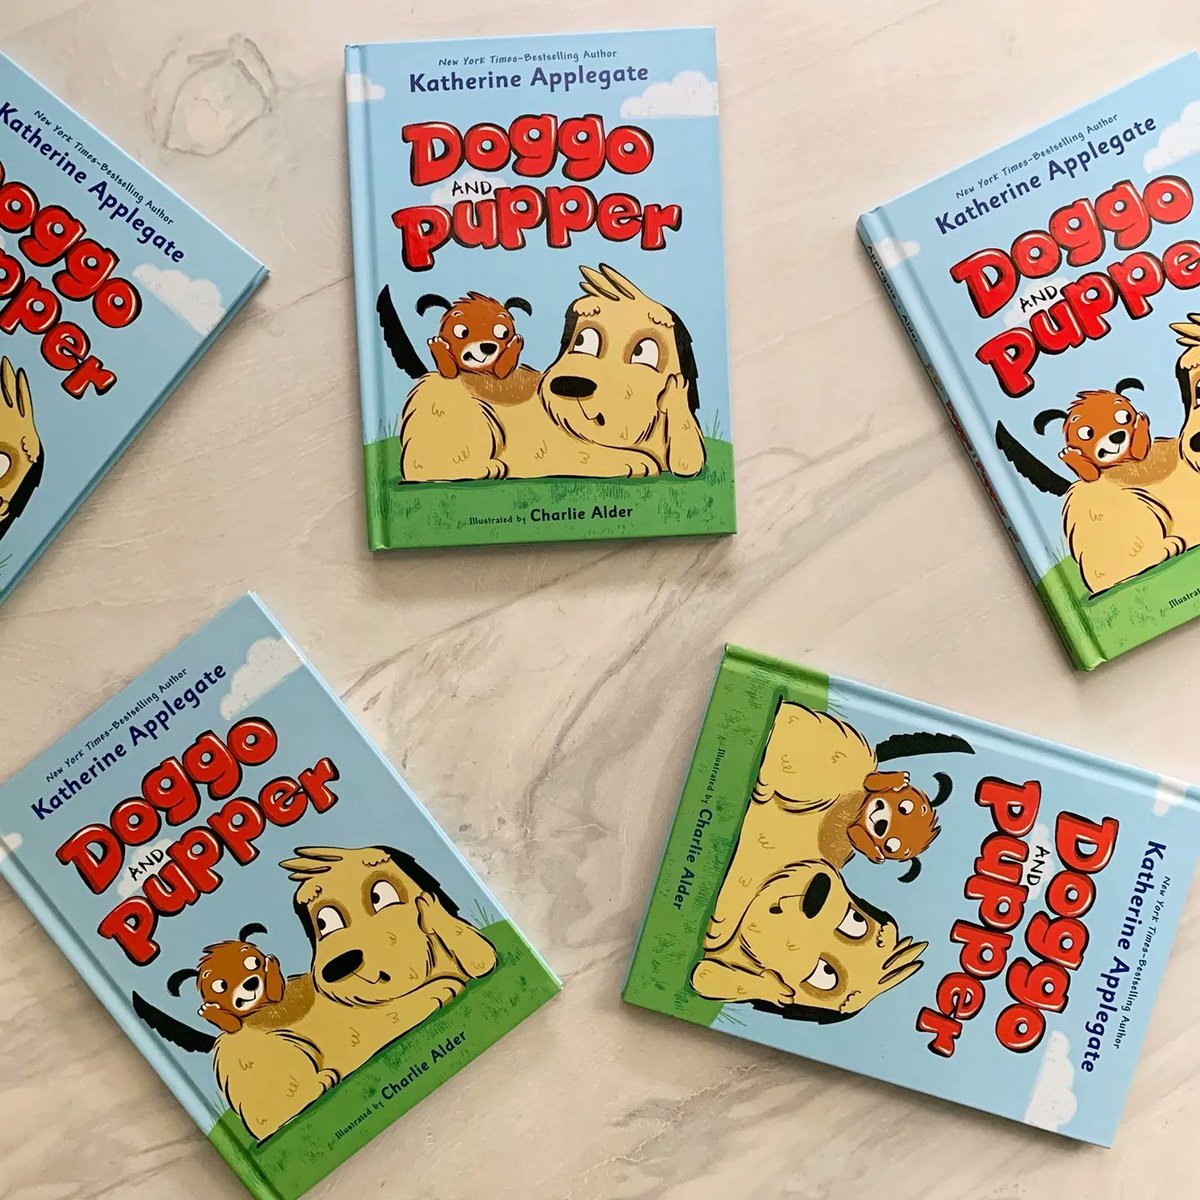 Book giveaway! ❤️🐶 The third #DoggoAndPupper book comes out next month. Need to get caught up on the series? RT this post and follow me, and you could win a signed copy of book one: DOGGO AND PUPPER. I'll choose + notify 5 random winners on Feb. 21. Good luck! @MacKidsBooks